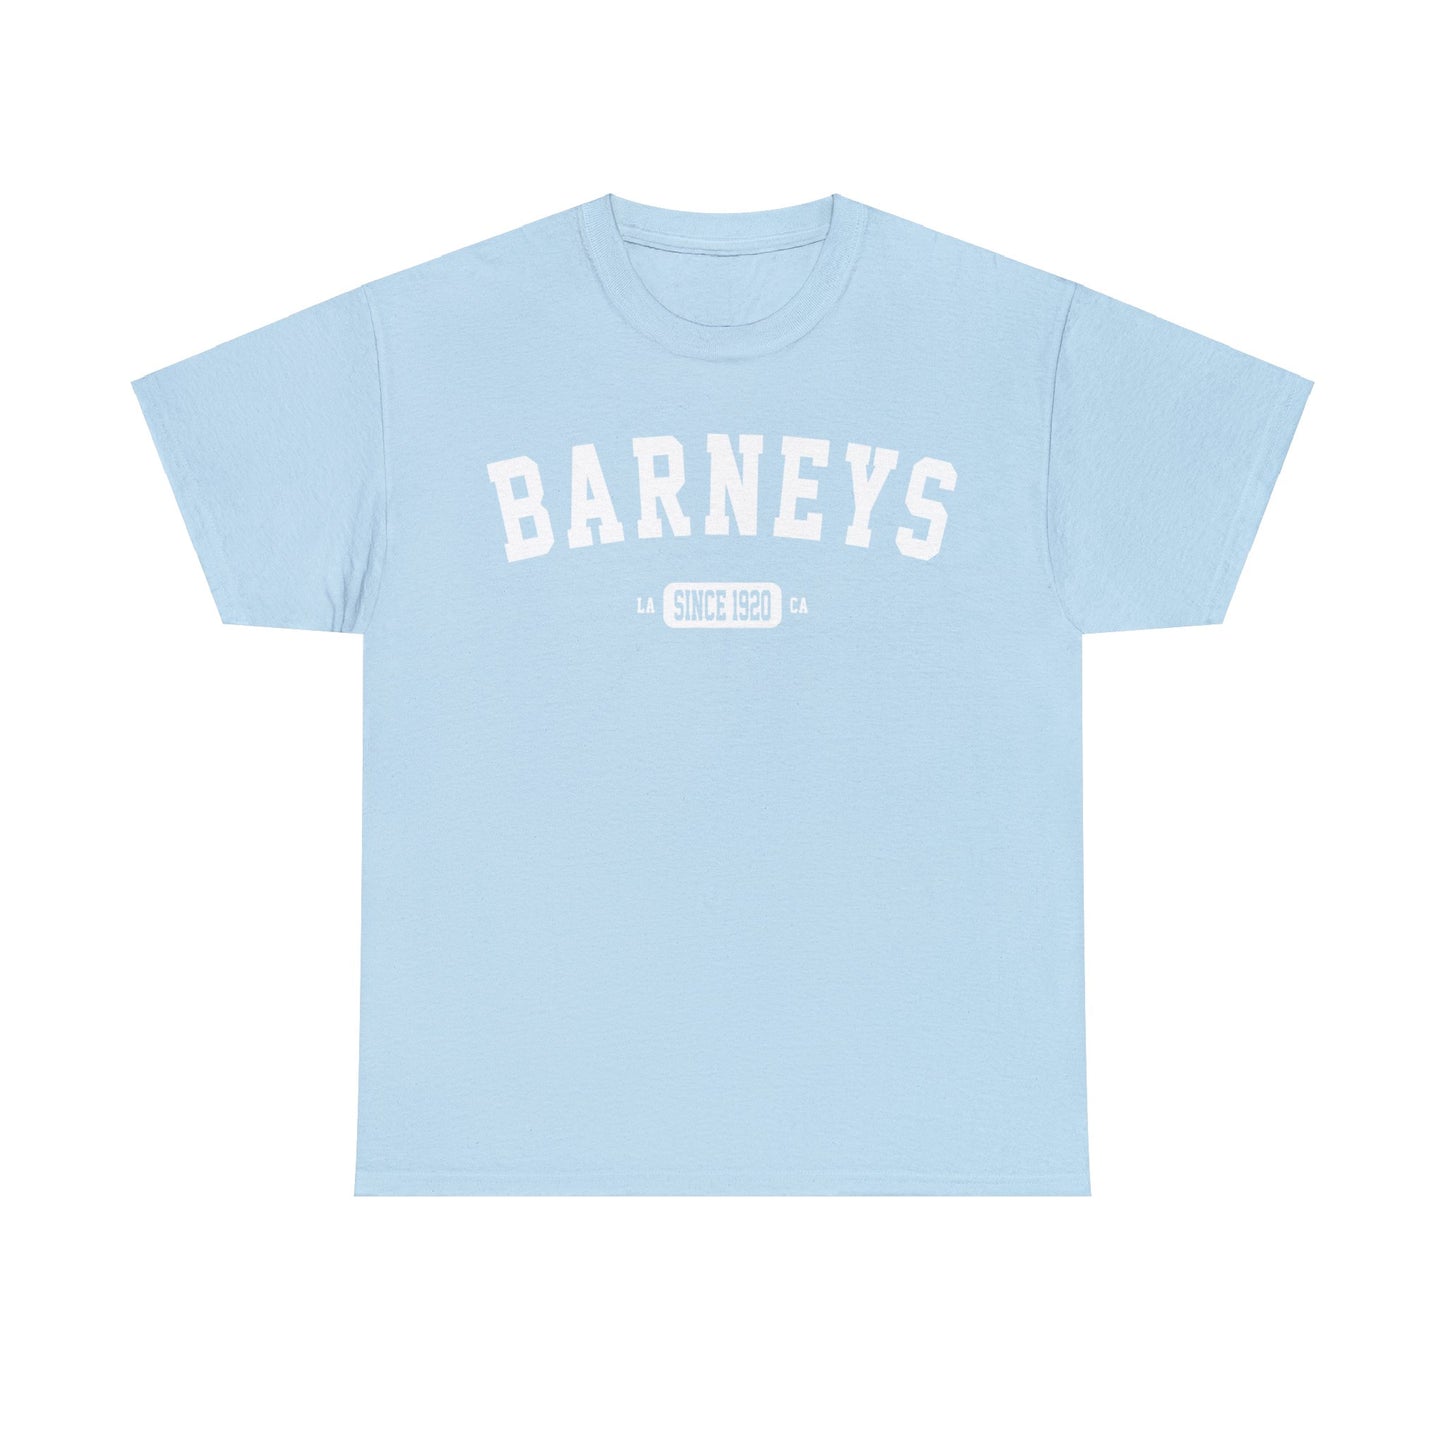 Vintage Collegiate | BARNEY'S BEANERY - Women's Graphic Tee | Light Blue Gildan 5000 T-Shirt, White Graphic, Front View Flat Lay